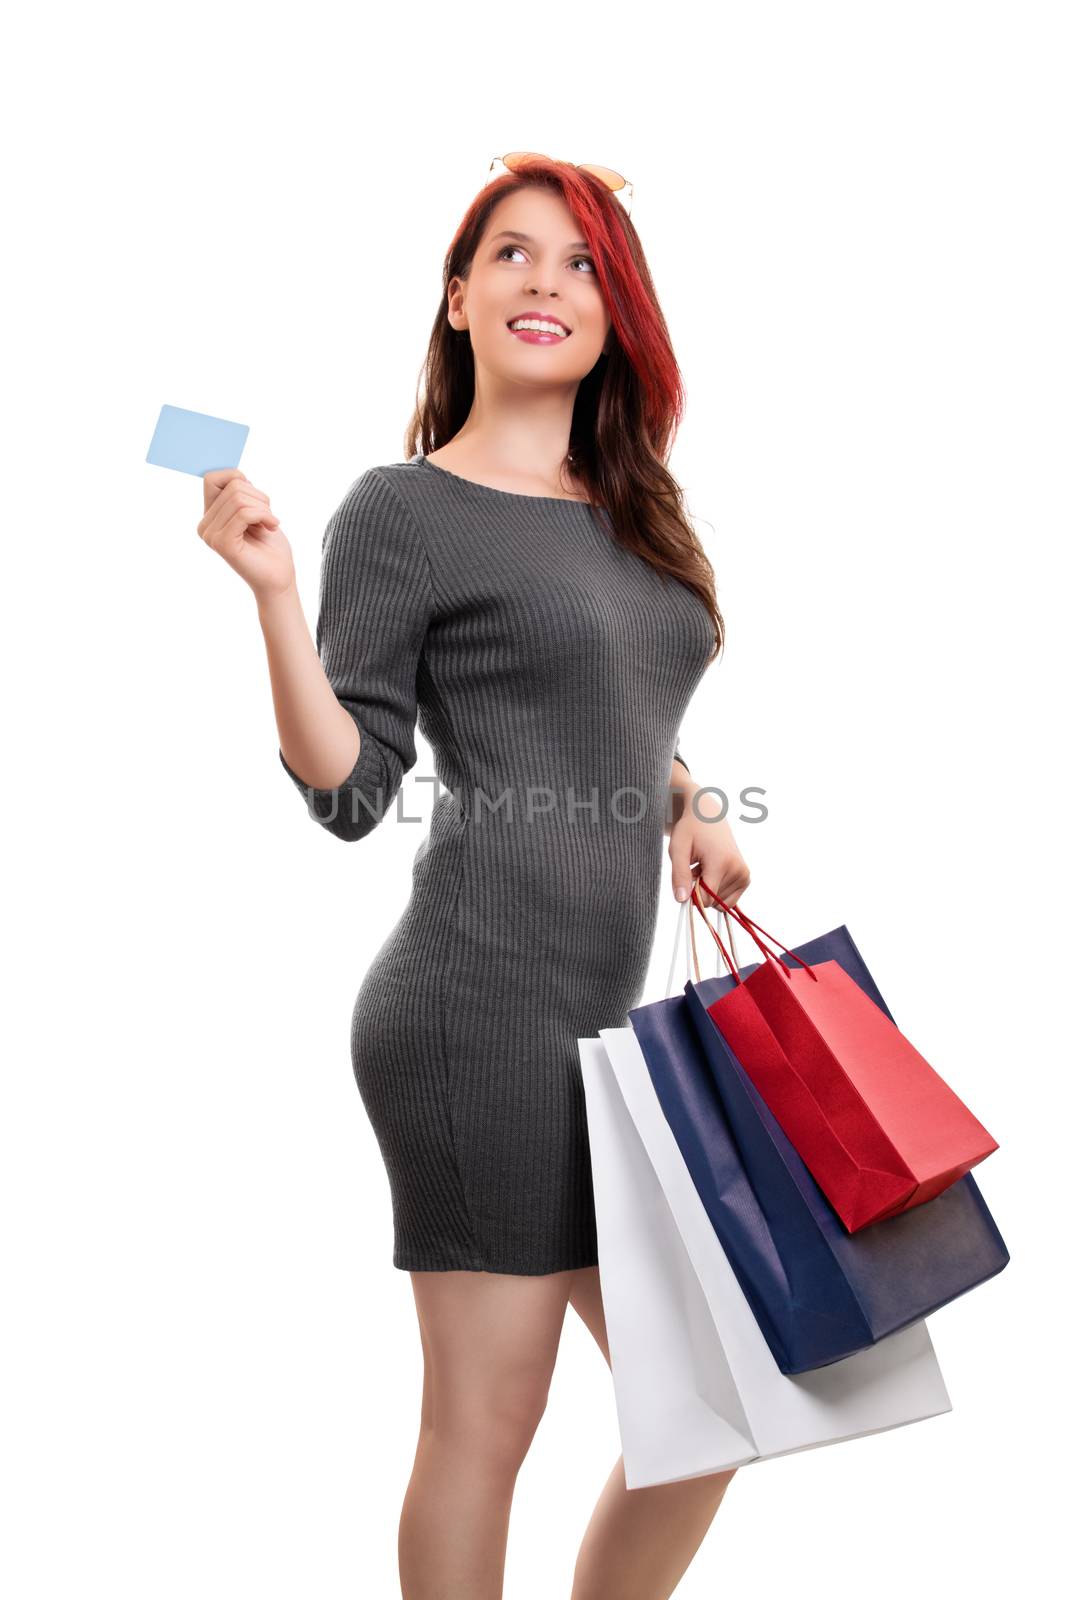 Beautiful young girl in a dress with sunglasses, holing shopping bags and a blank card, isolated on white background. Shopping concept, copy space.